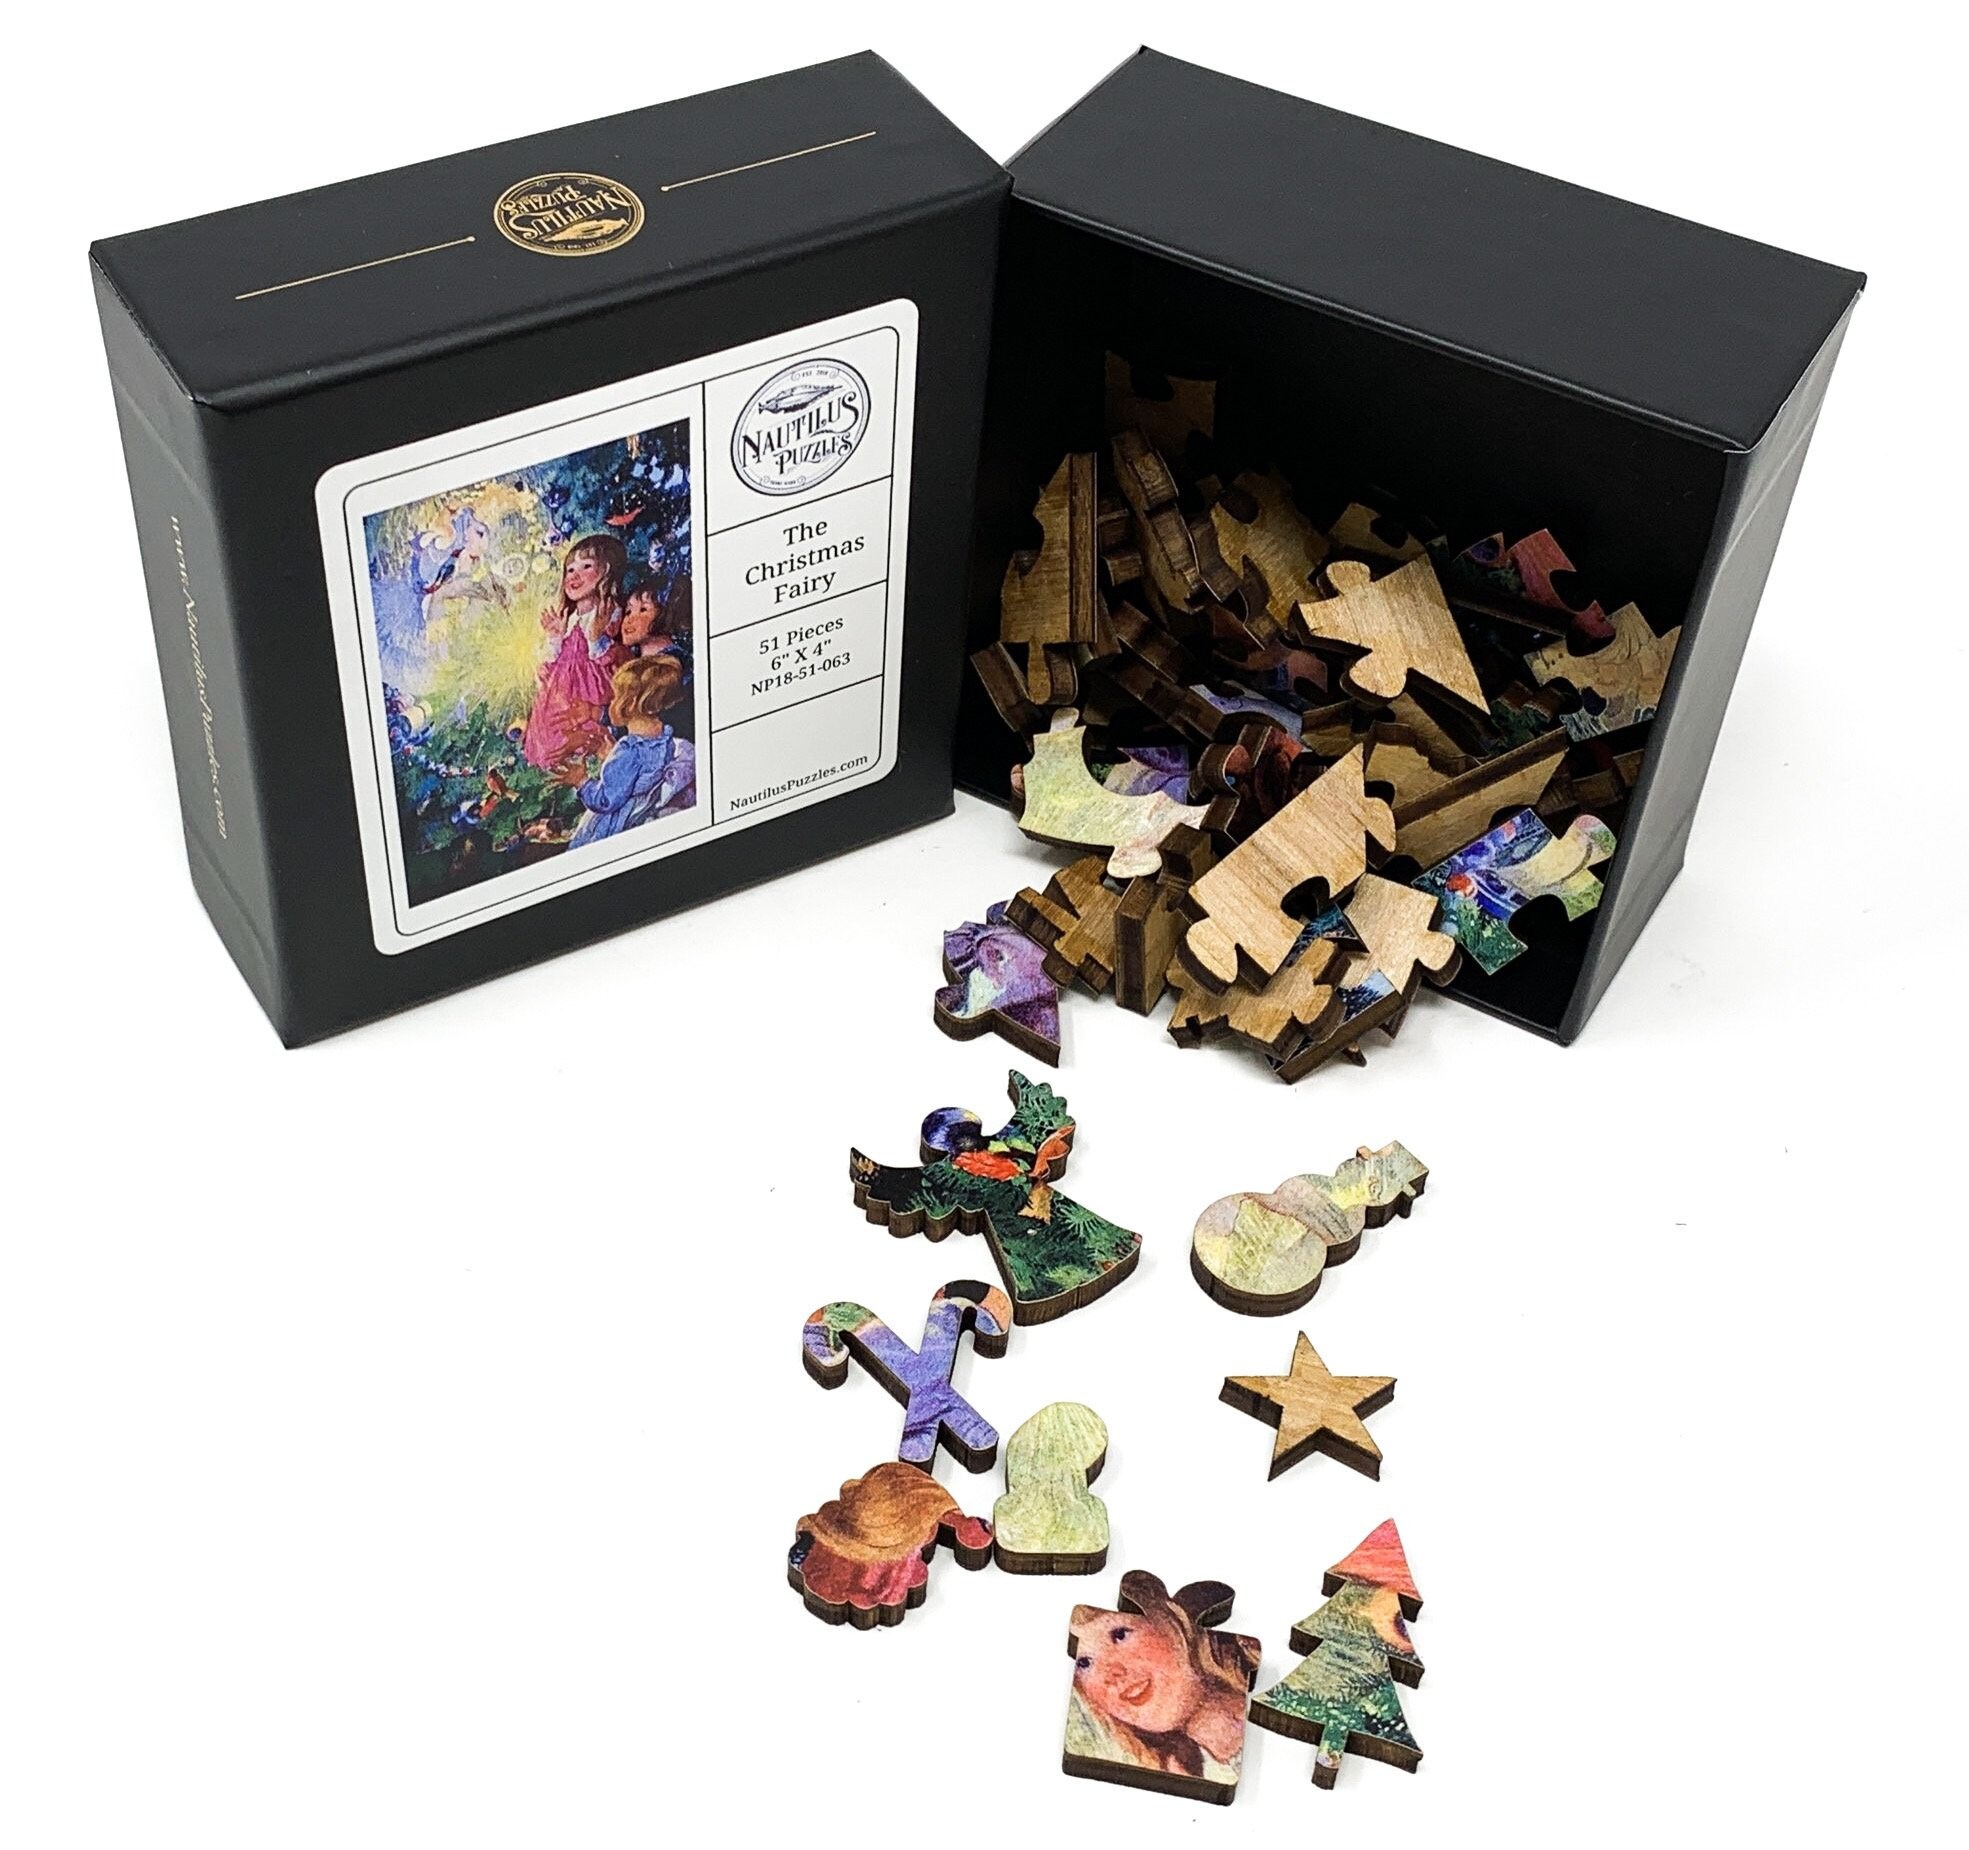 The Christmas Fairy 51 Piece Mini Wooden Jigsaw Puzzle by Nautilus Puzzles 